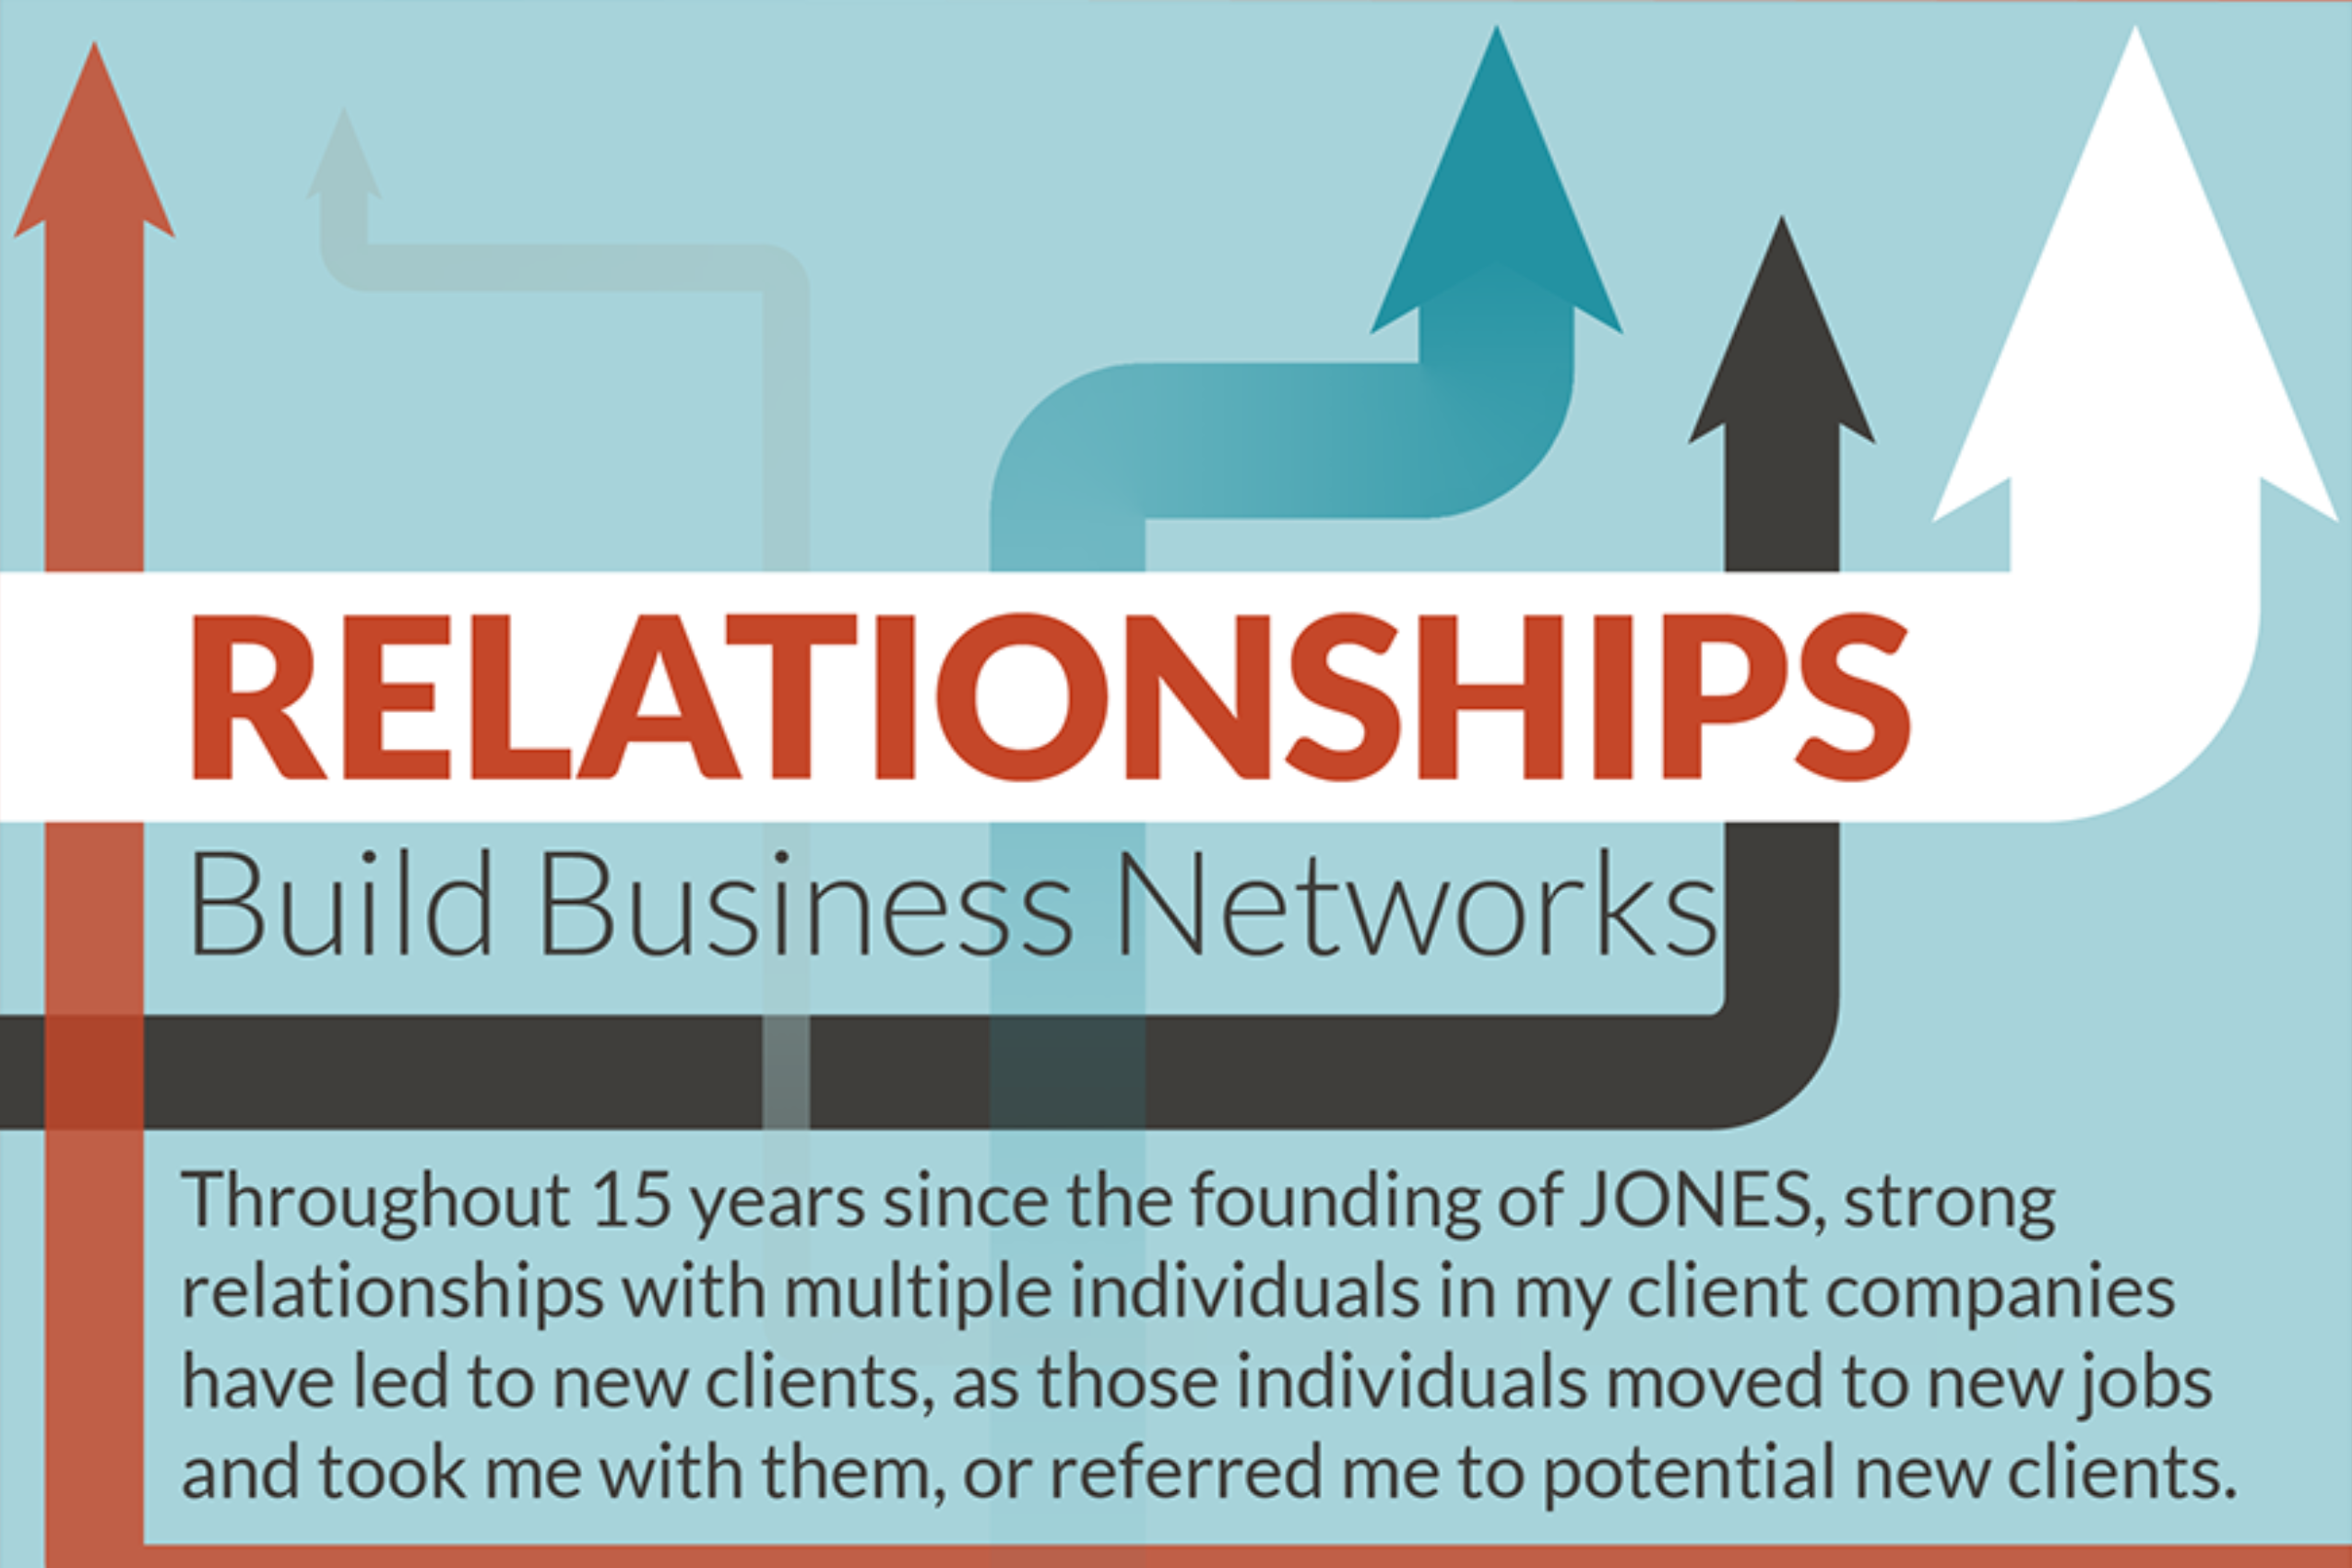 Lessons from 15 Years: Today’s Strong Relationships Are Tomorrow’s Enduring (Or New) Accounts